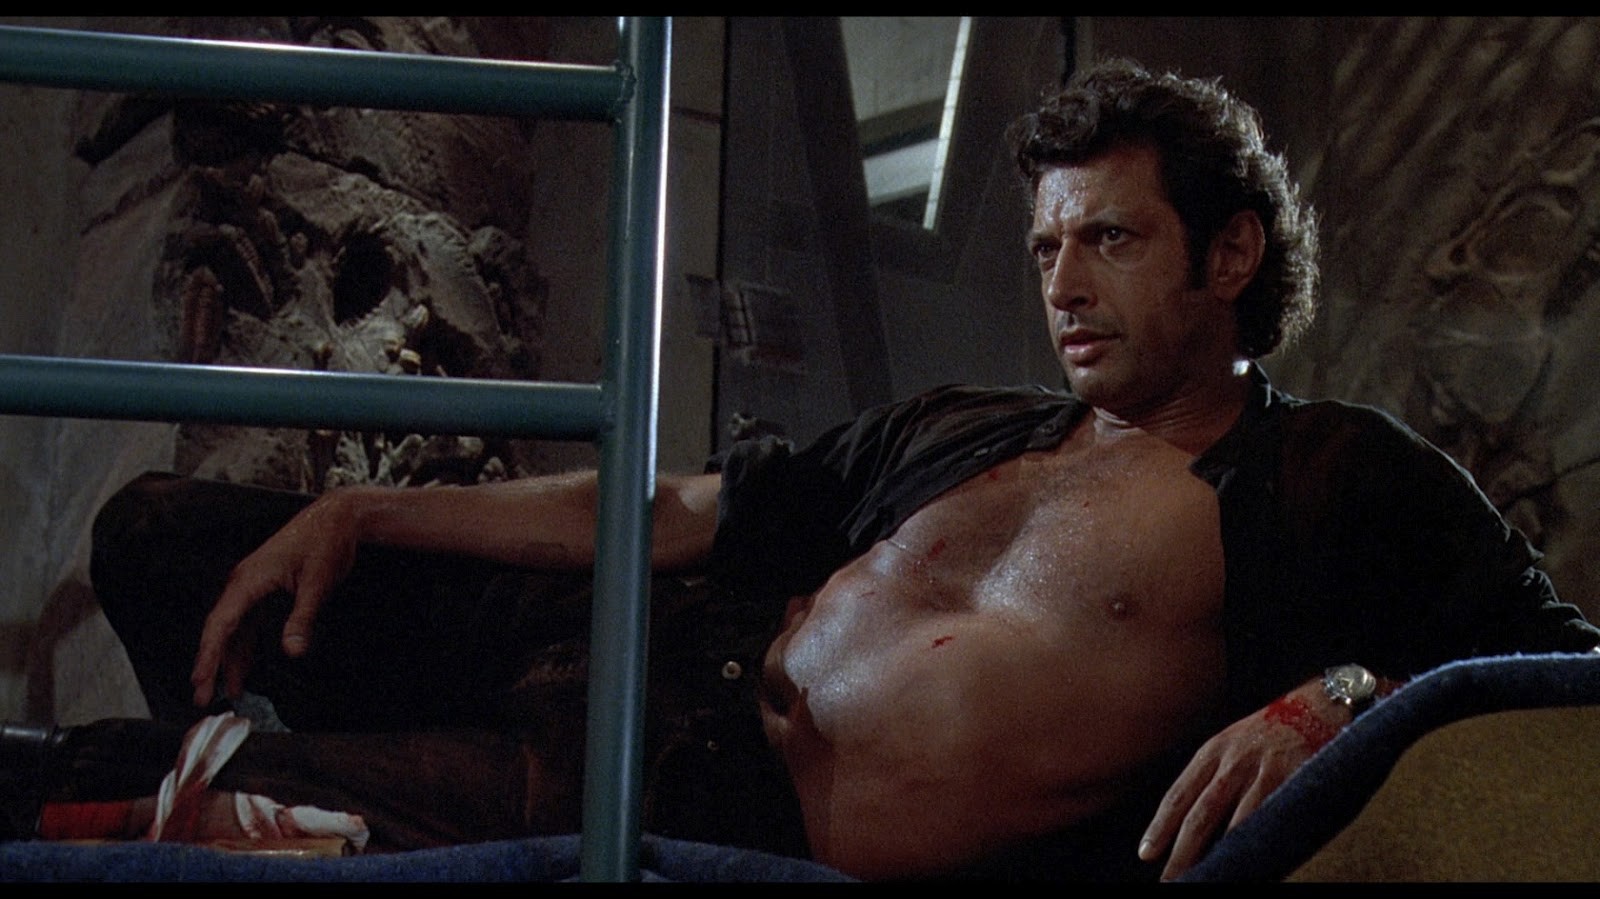 Jeff Goldblum as Dr. Ian Malcolm in Jurassic Park, shirtless and in a come-hither pose.